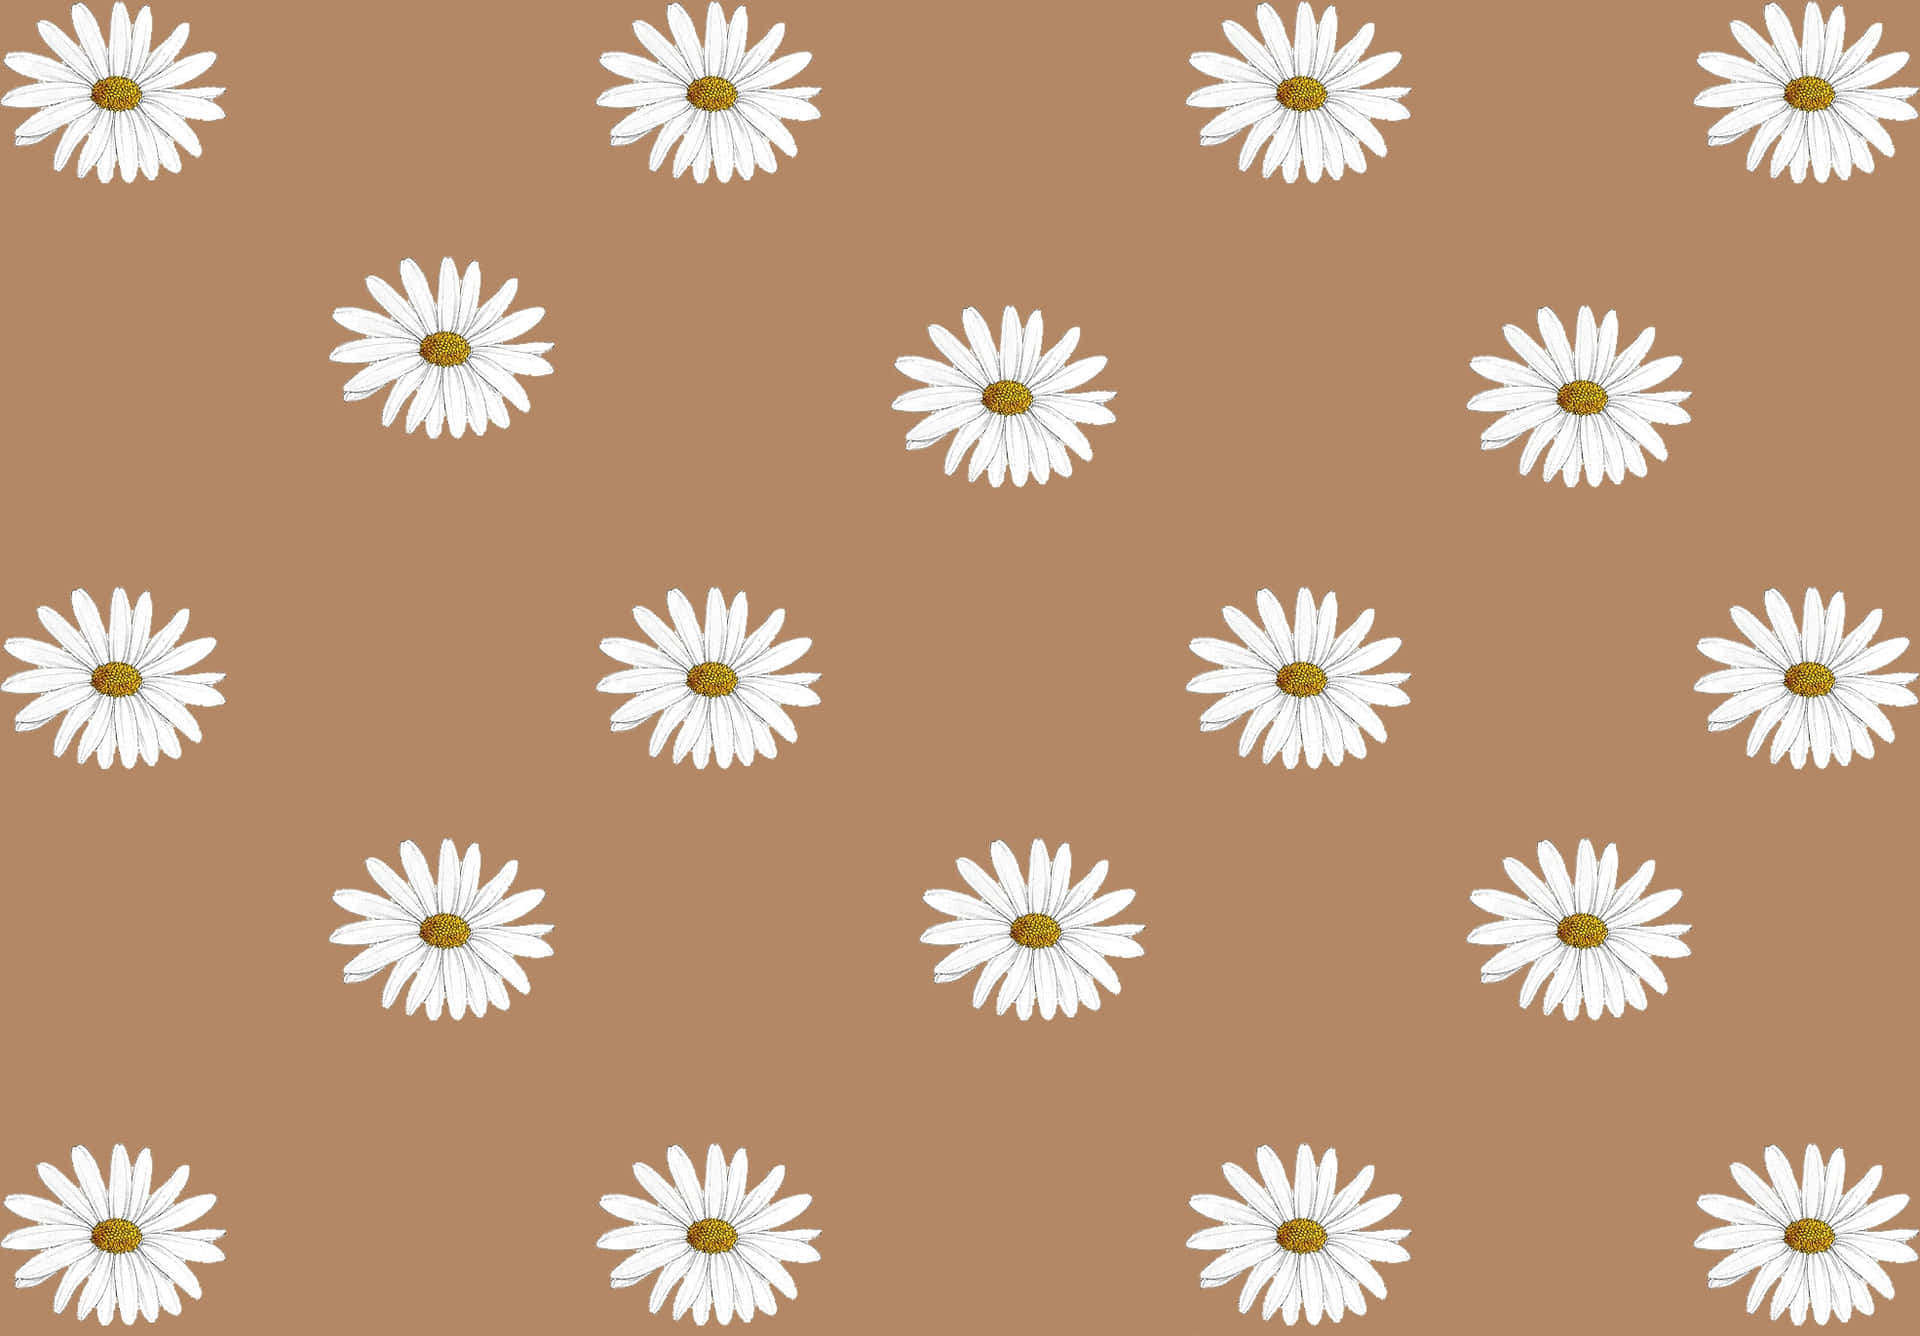 Daisy Pattern On A Brown Background